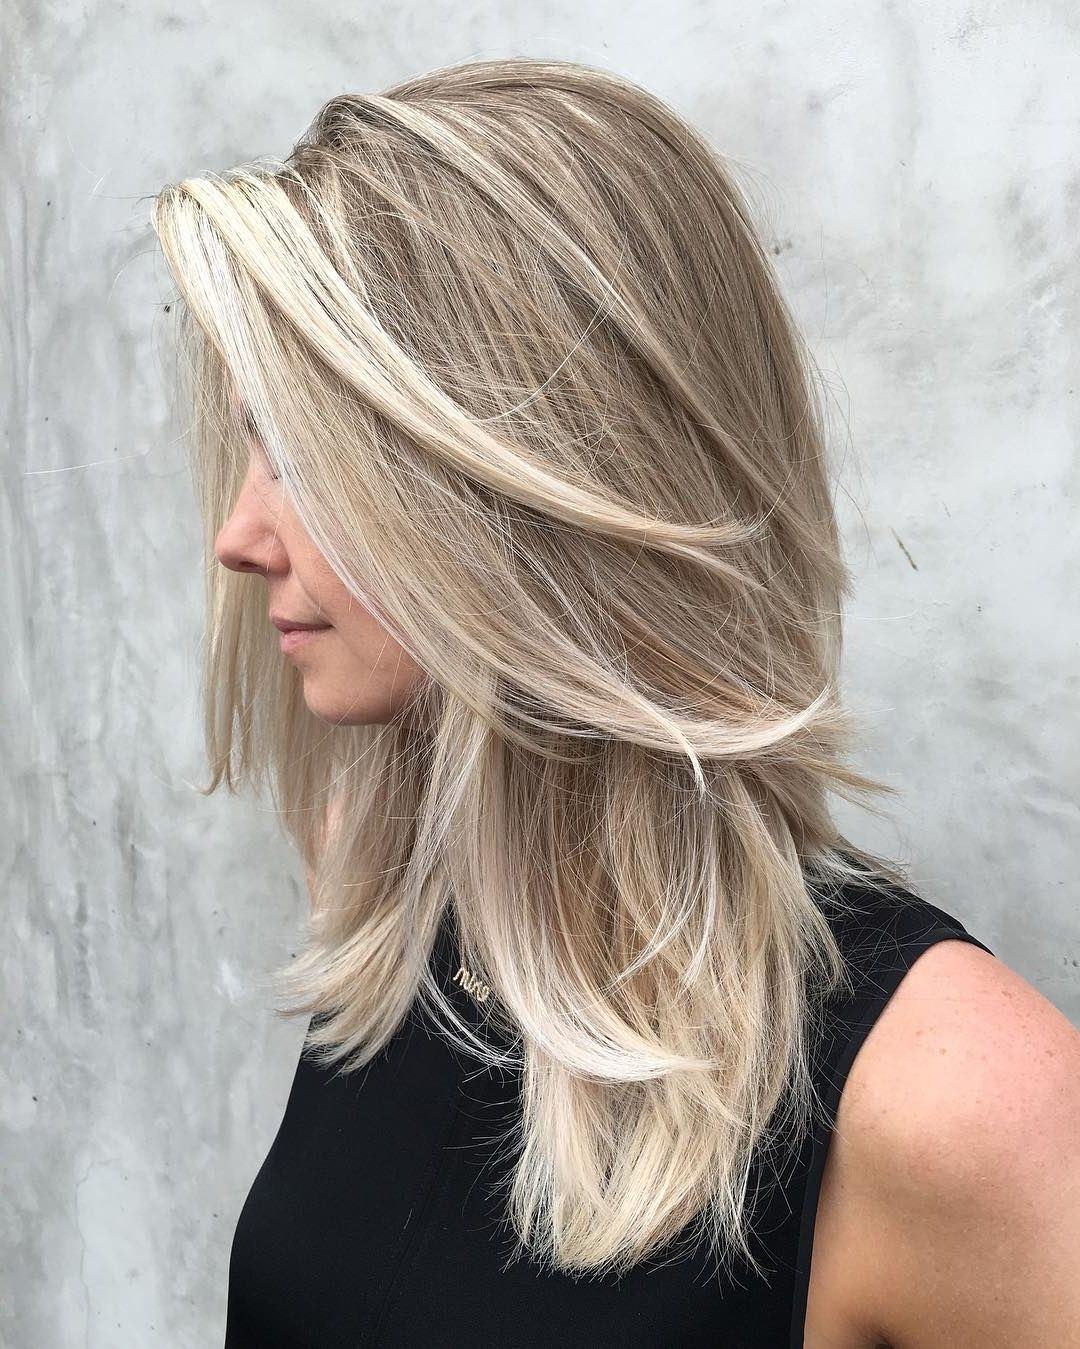 20 Beautiful Blonde Hairstyles To Play Around With In Widely Used Icy Waves And Angled Blonde Hairstyles (View 17 of 20)